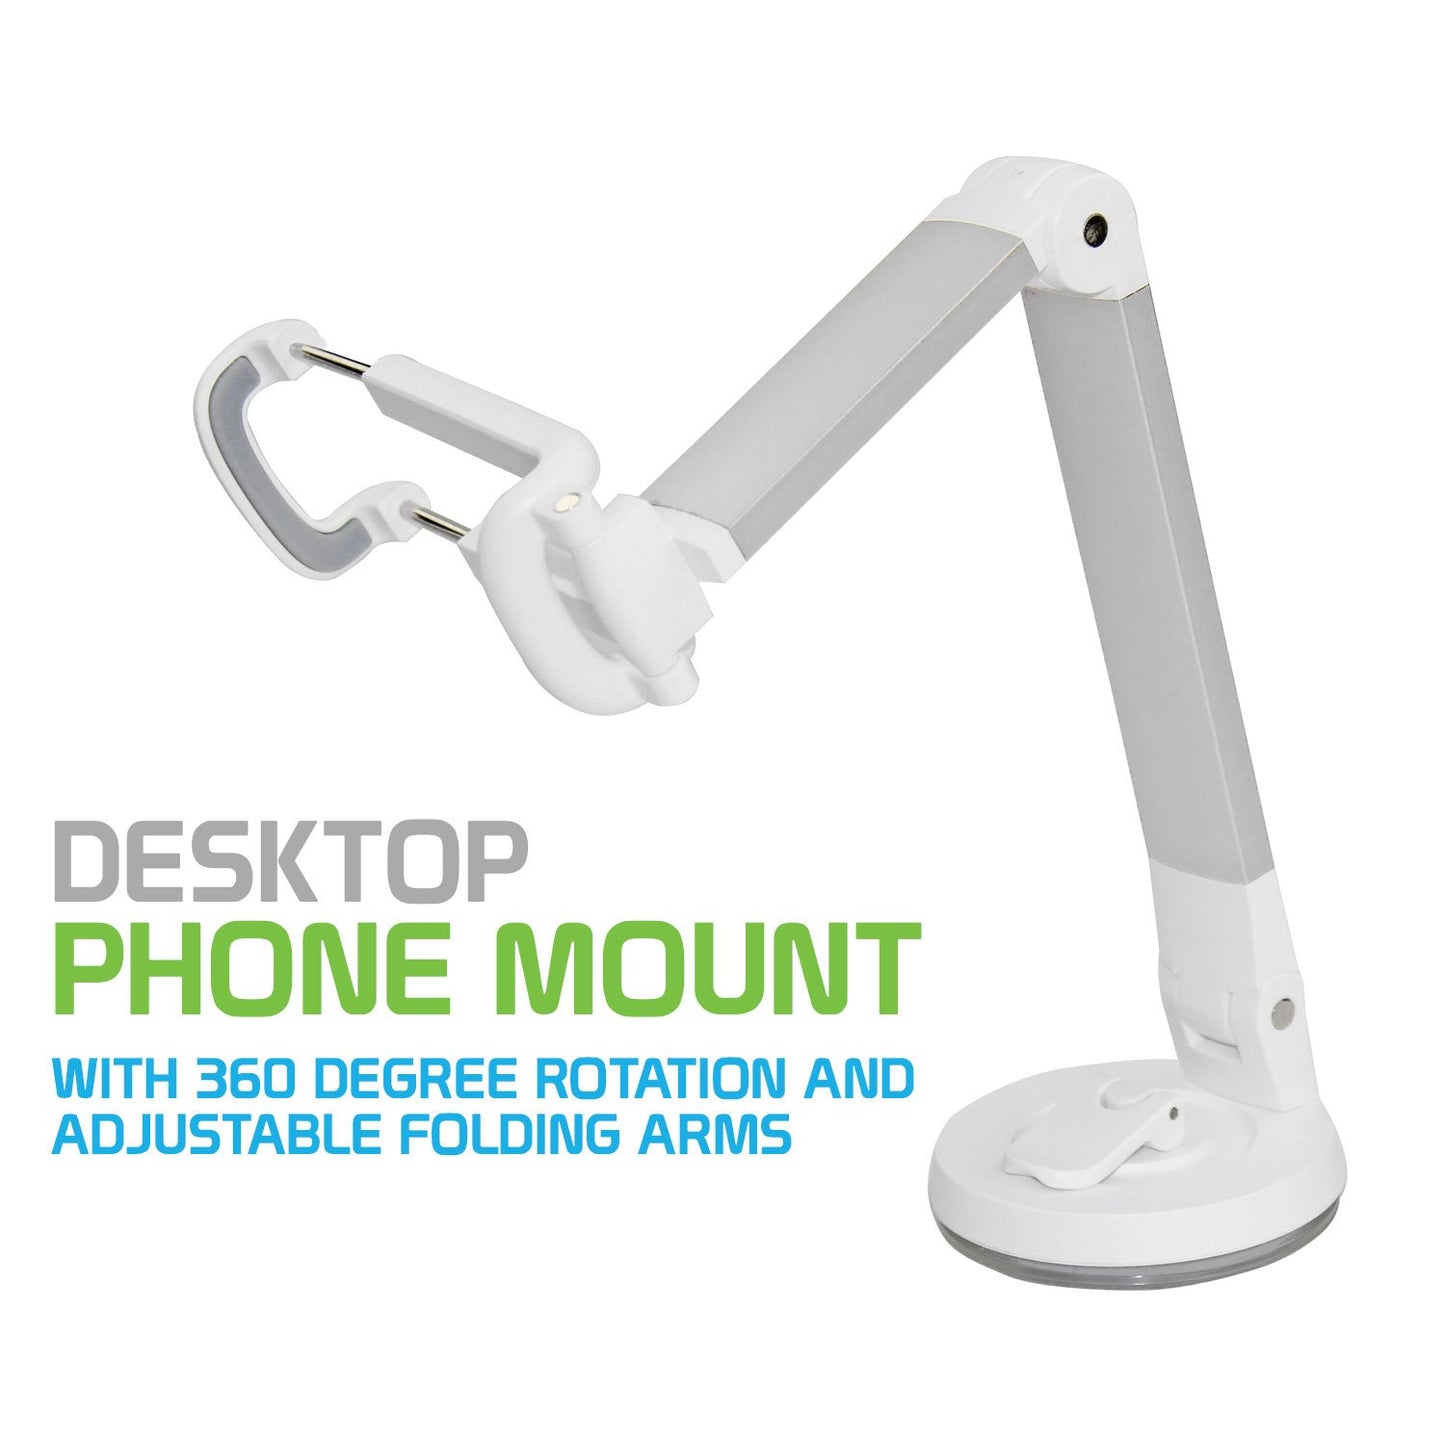 PH118ESL - Dashboard, Windshield and Desktop Phone Mount with 360 Degree Rotation and Adjustable Folding Arms for Smartphones